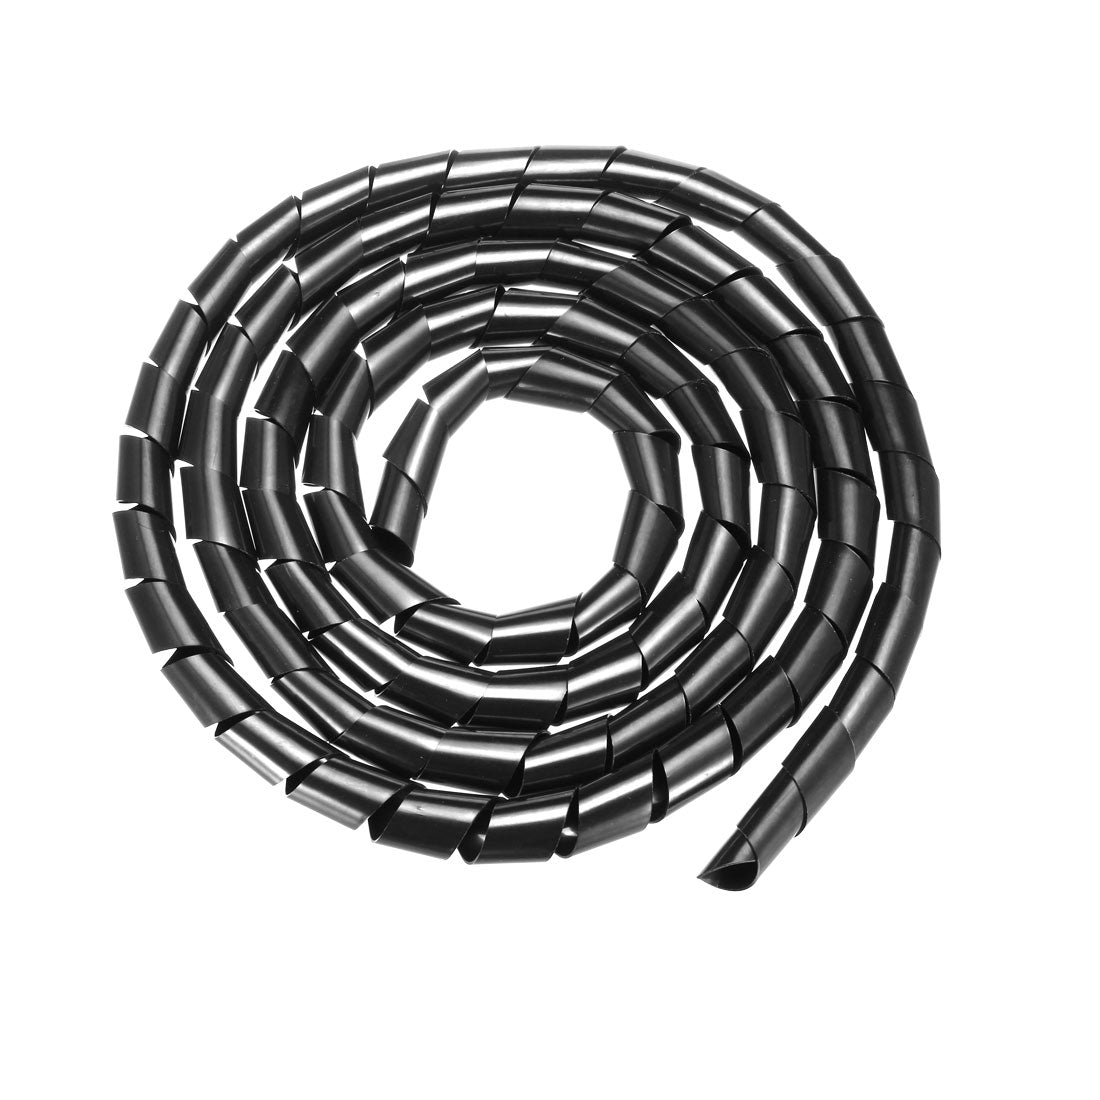 uxcell Uxcell 18mm Flexible Spiral Tube Cable Wire Wrap Computer Manage Cord 3Meter Length Black